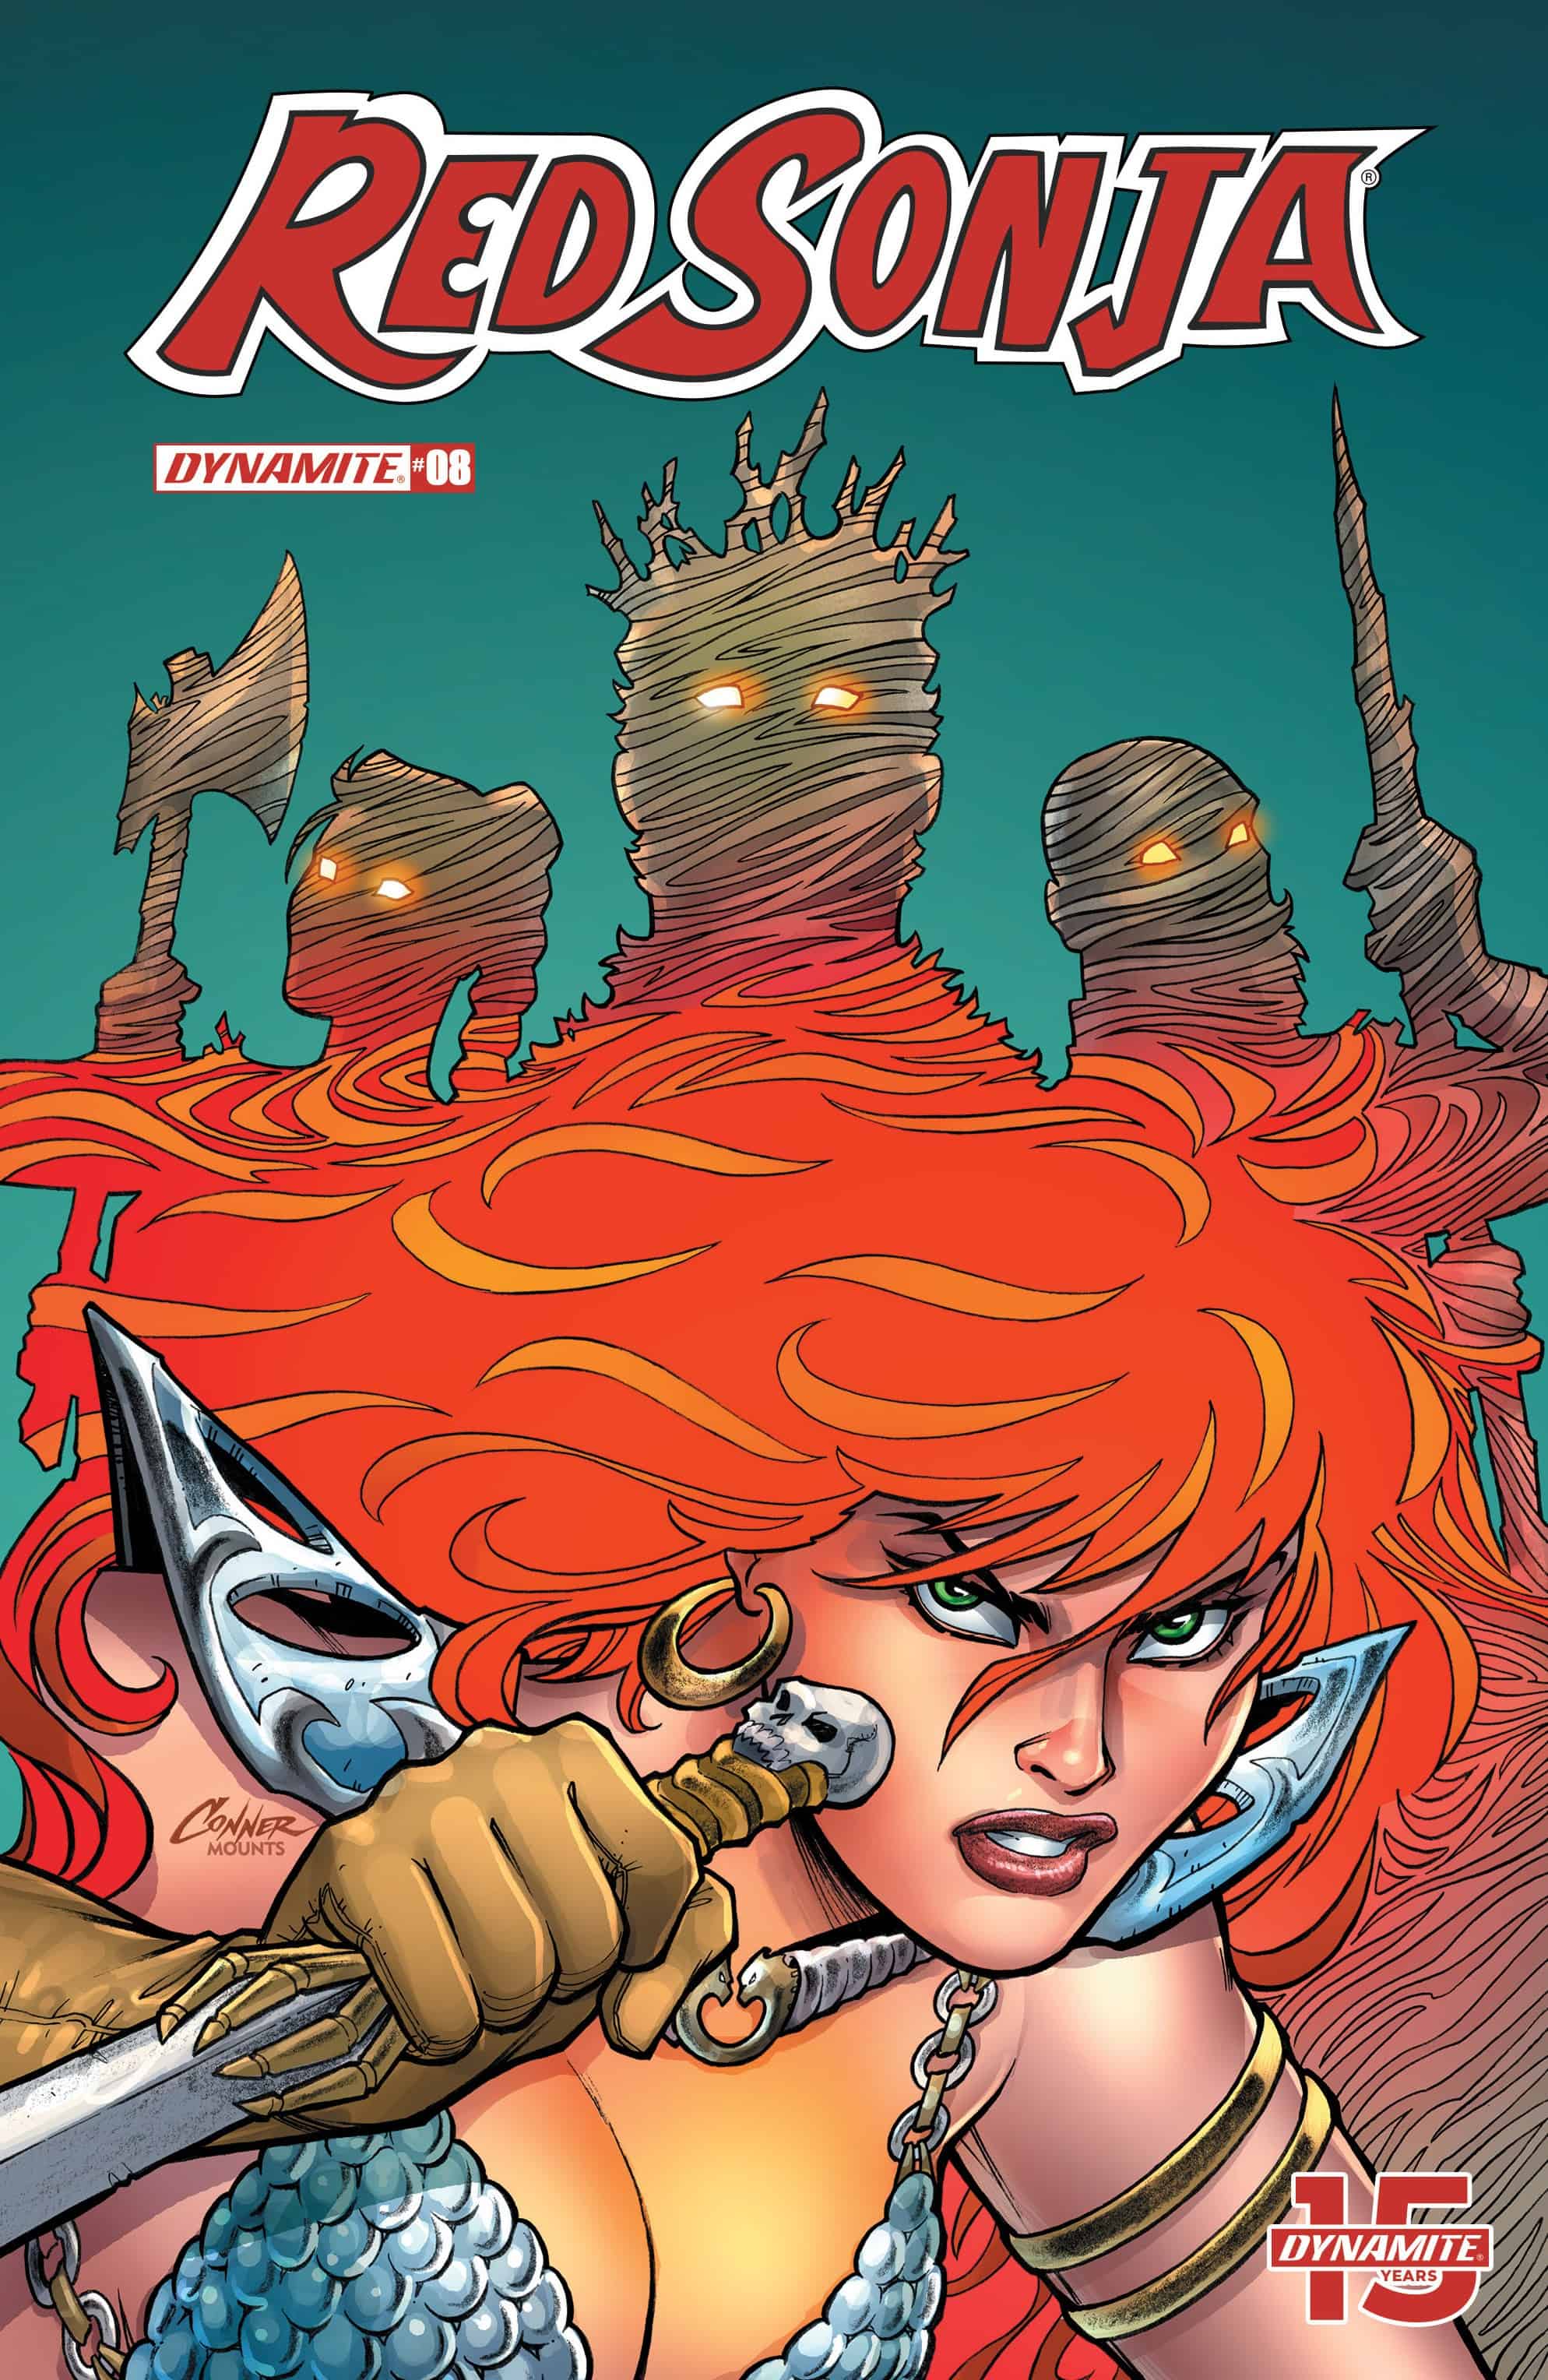 Red Sonja #8: A Contest of Hope Watch